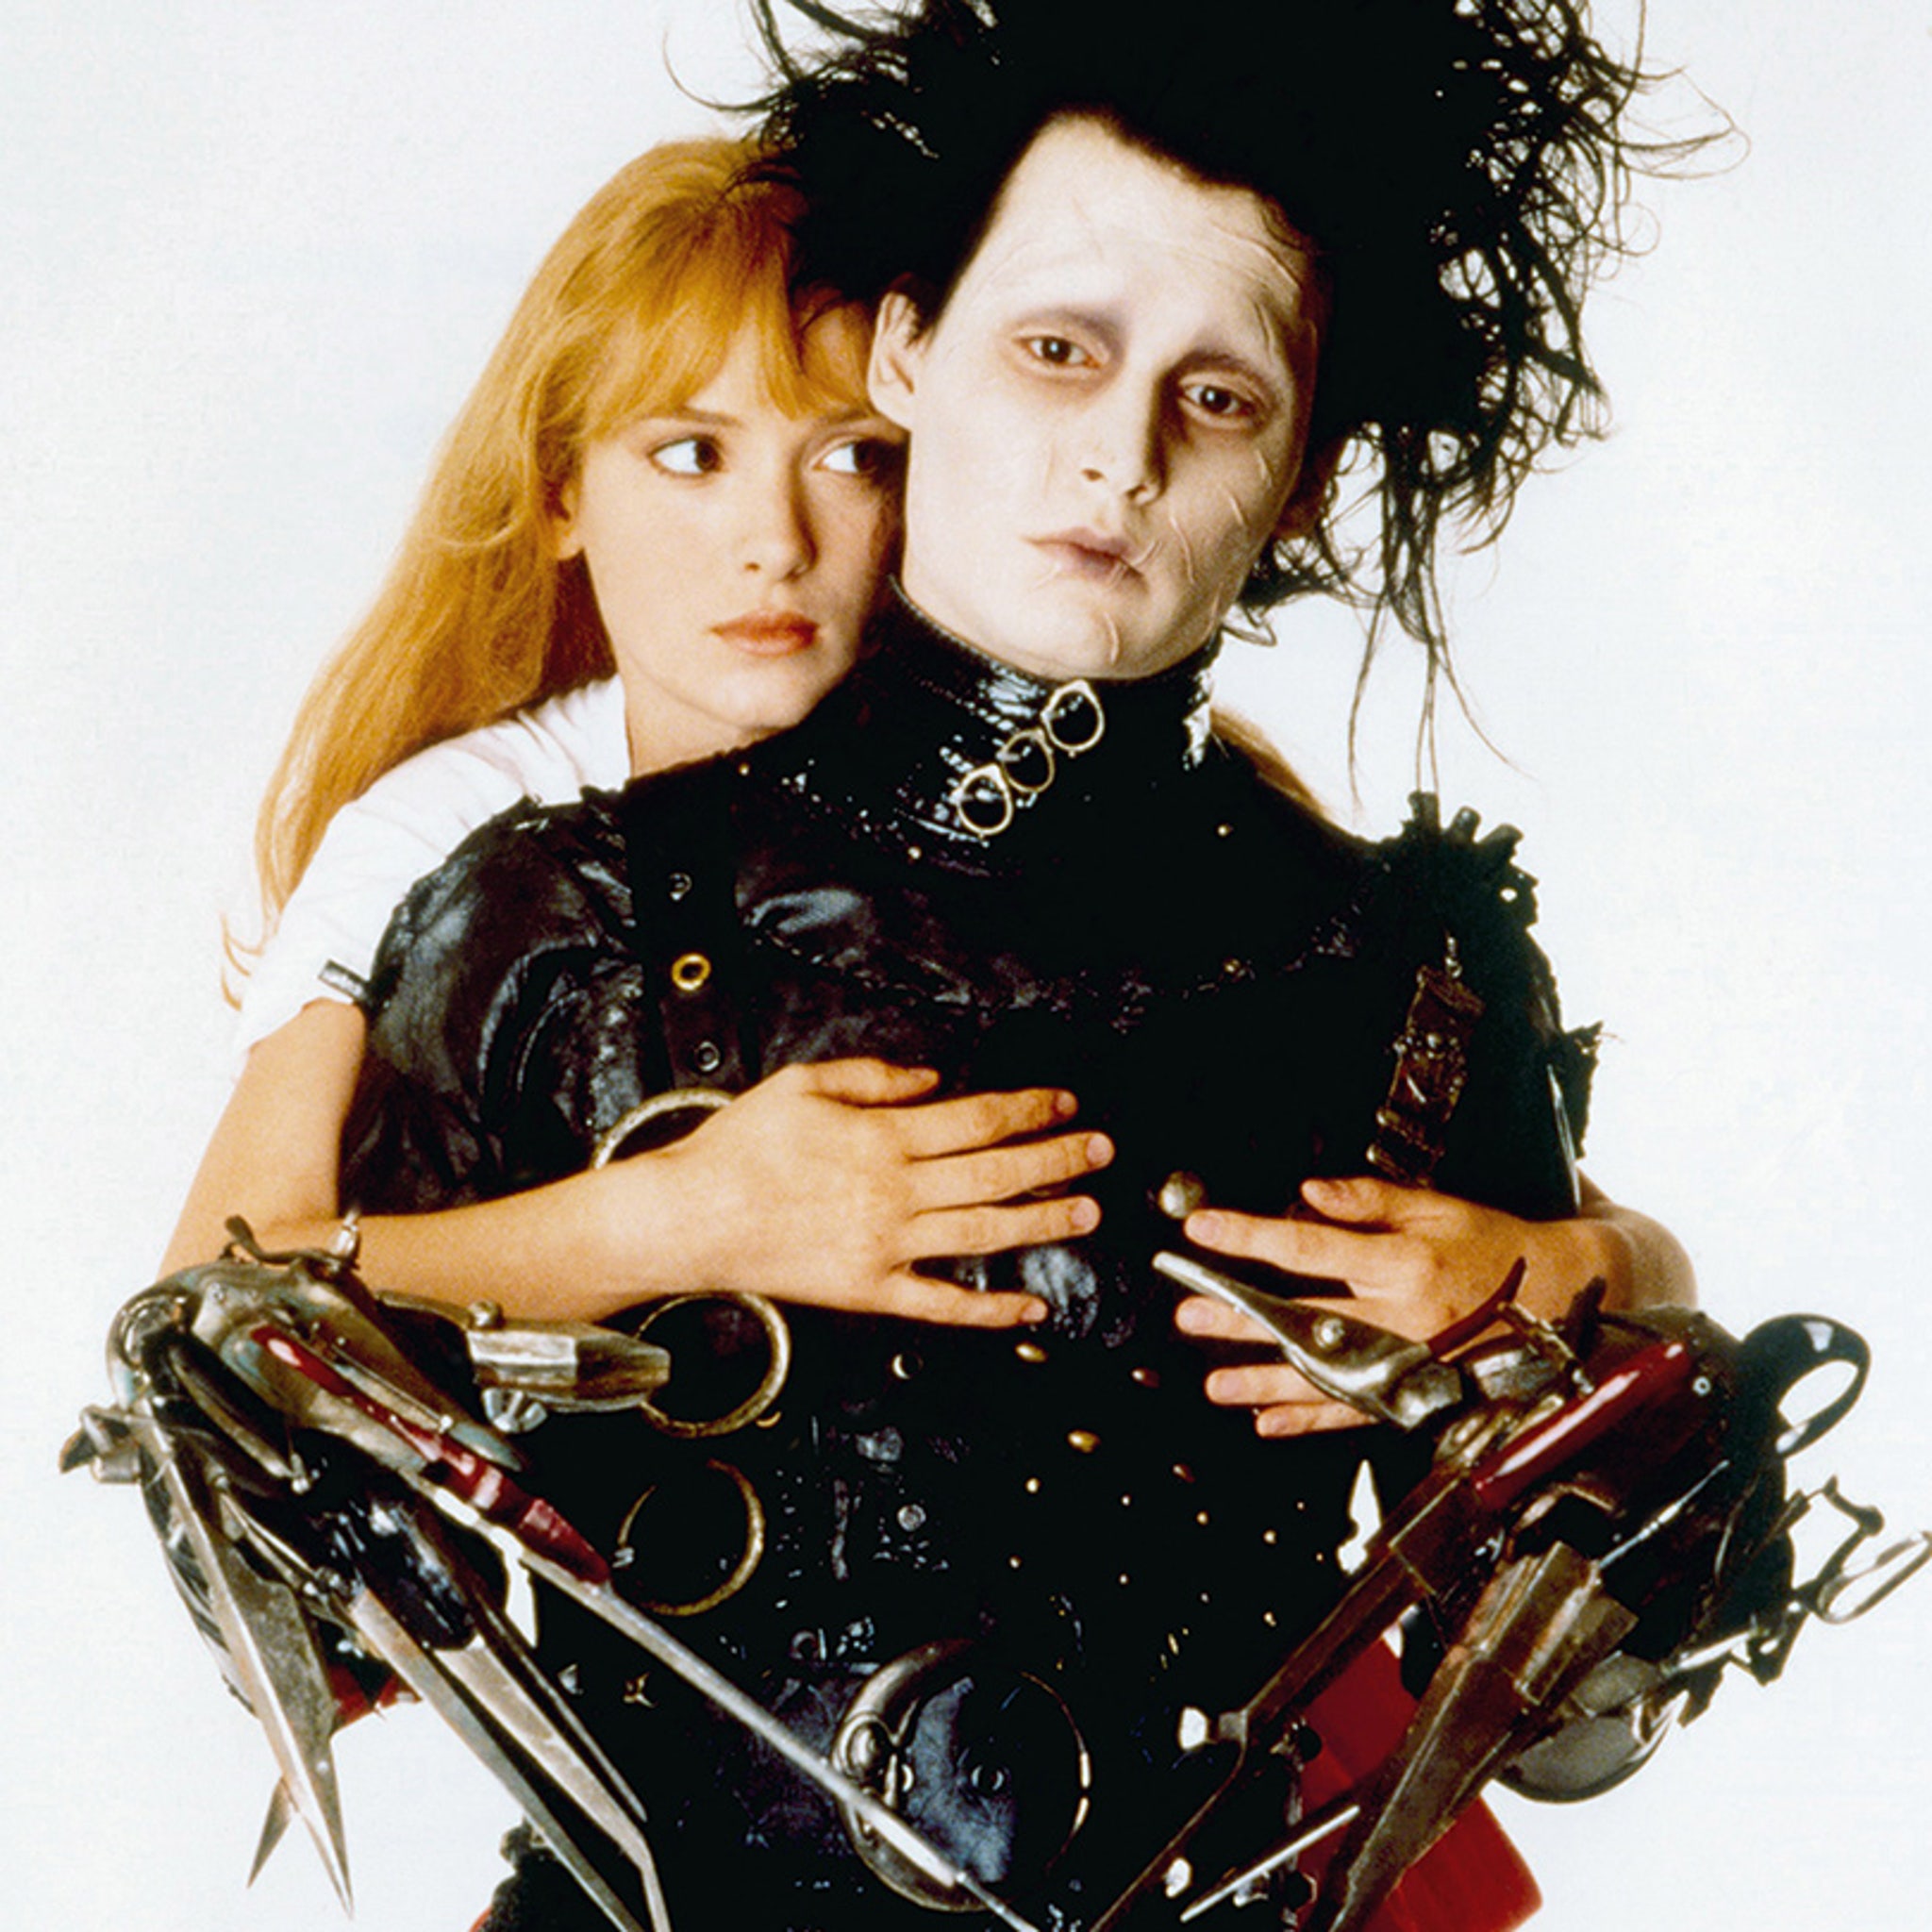 Edward Scissorhands" Turns 25 -- See Now as Makeup Up About Depp's Classic Look!